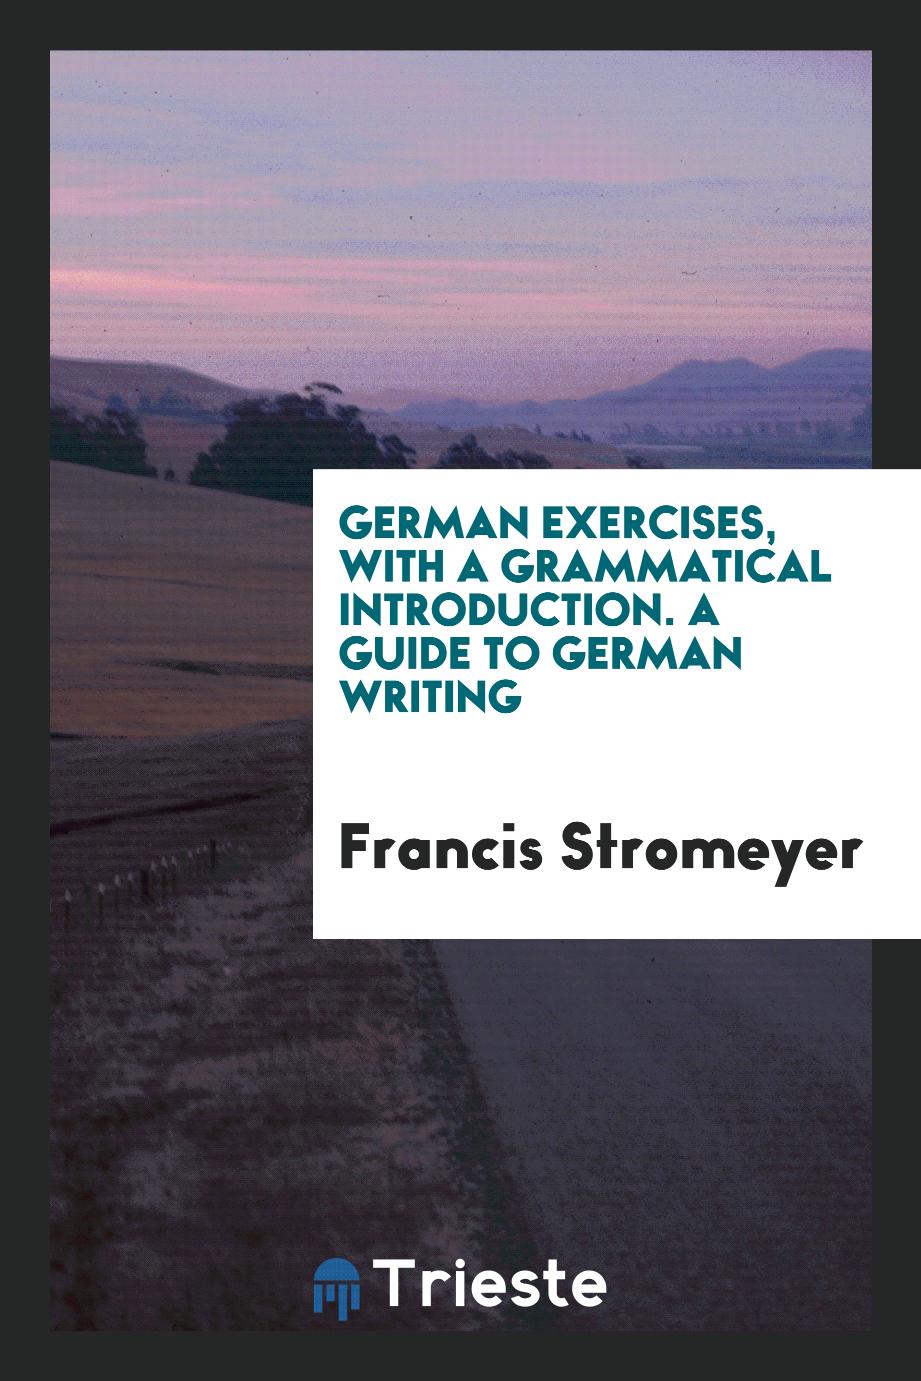 German Exercises, with a Grammatical Introduction. A Guide to German Writing